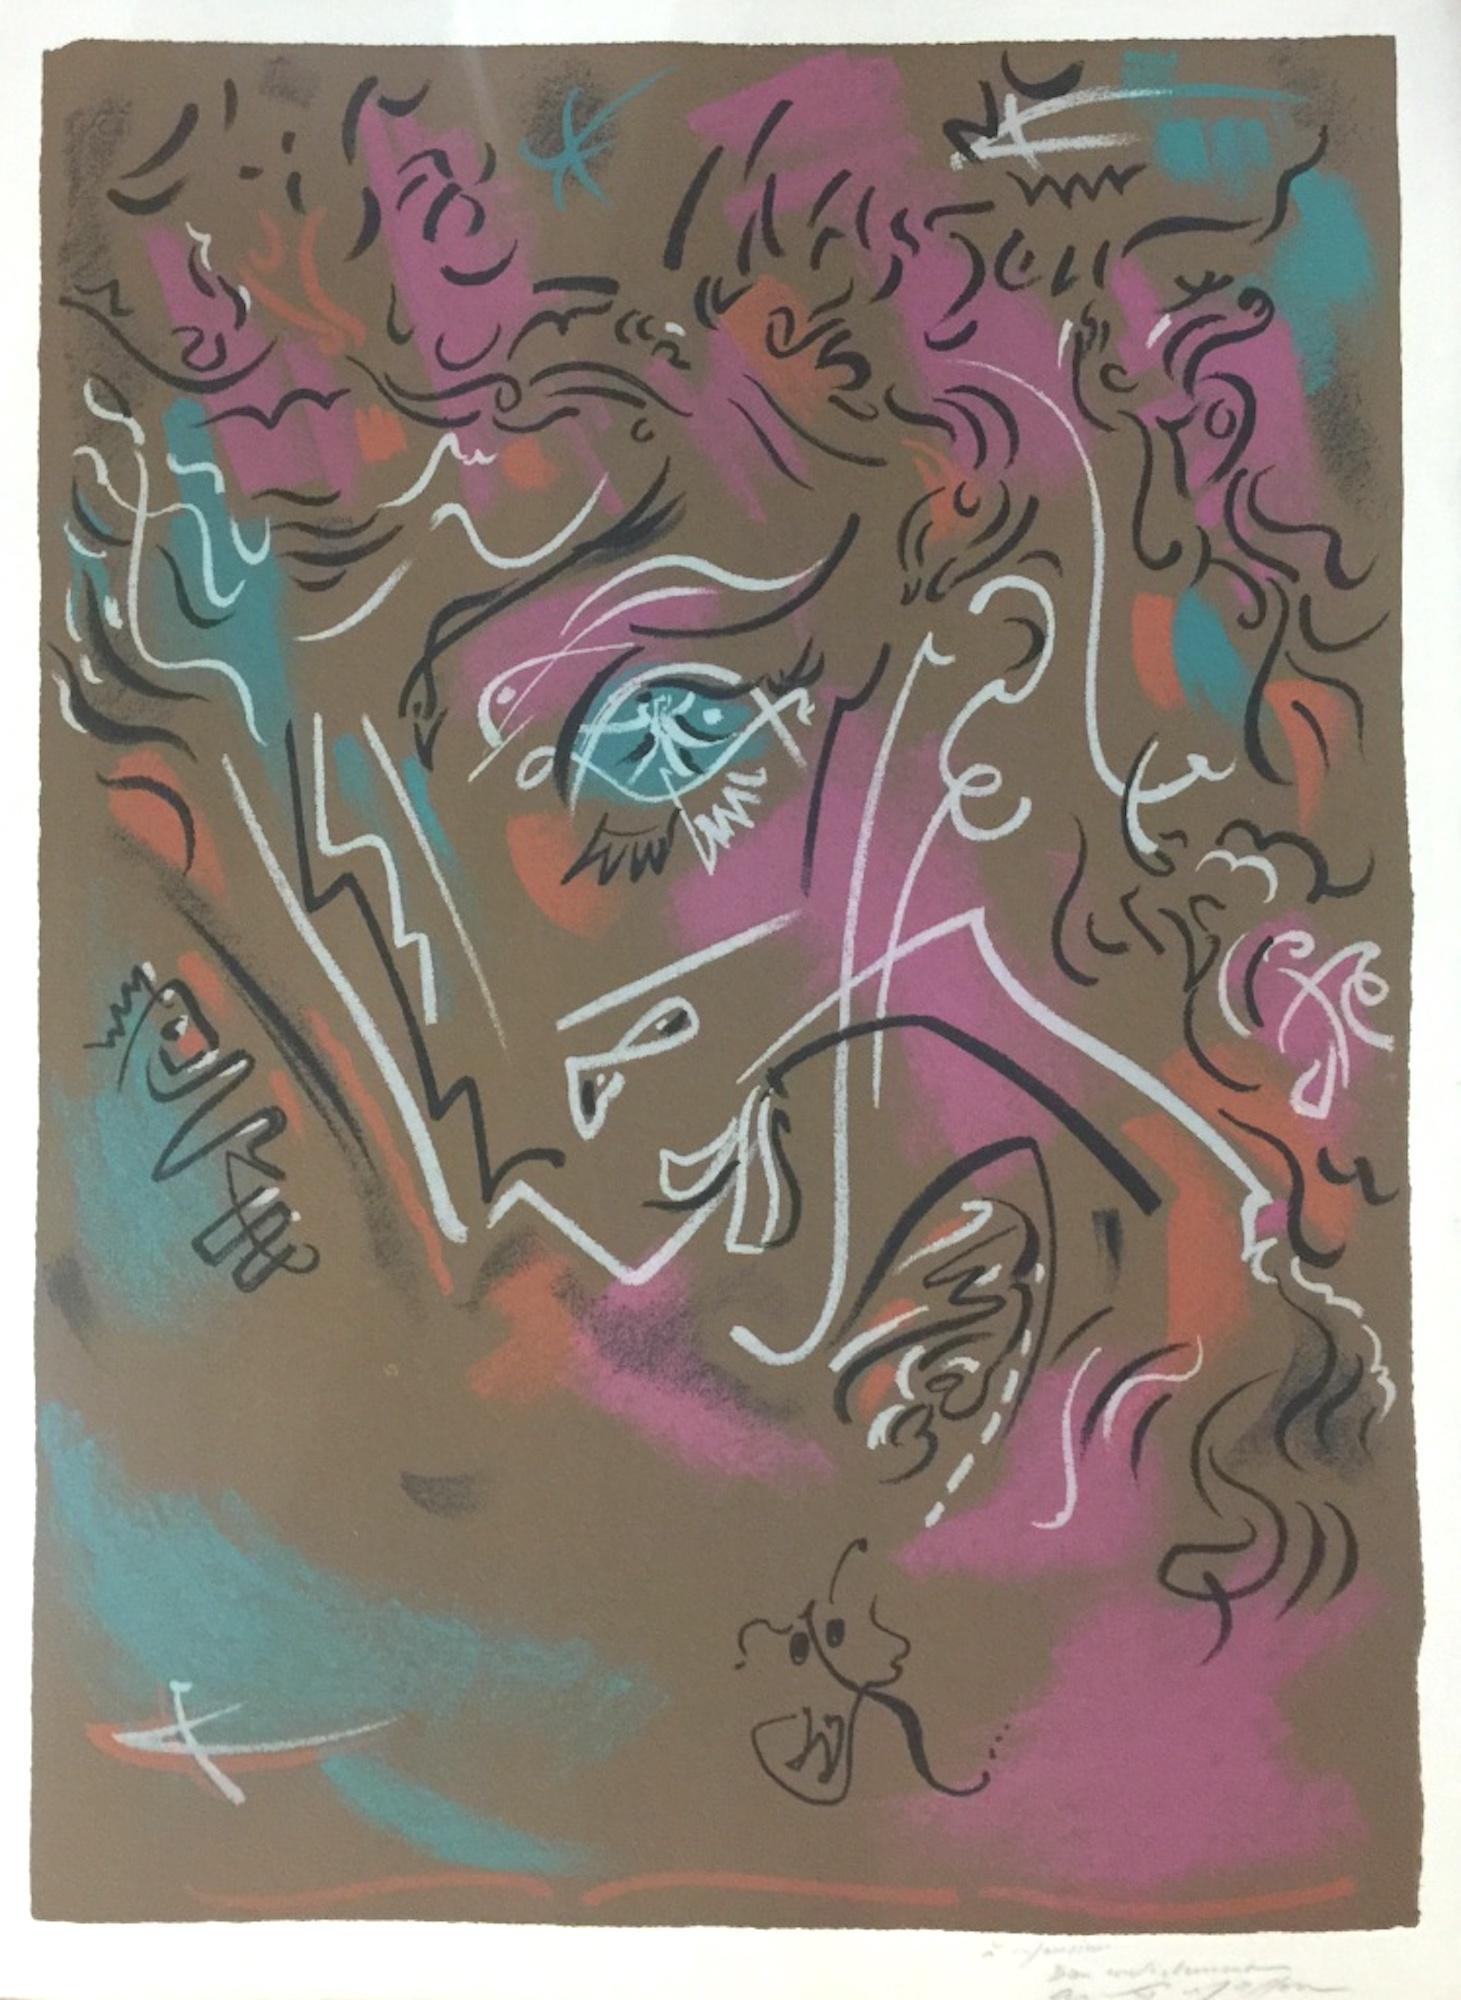 This is an hand signed lithograph by André Masson, with dedication.

André Masson was a French artist, well-known as part of the Surrealism. He was a painter but also a sculptor and printmaker. His work of printmaking is mainly related to the book